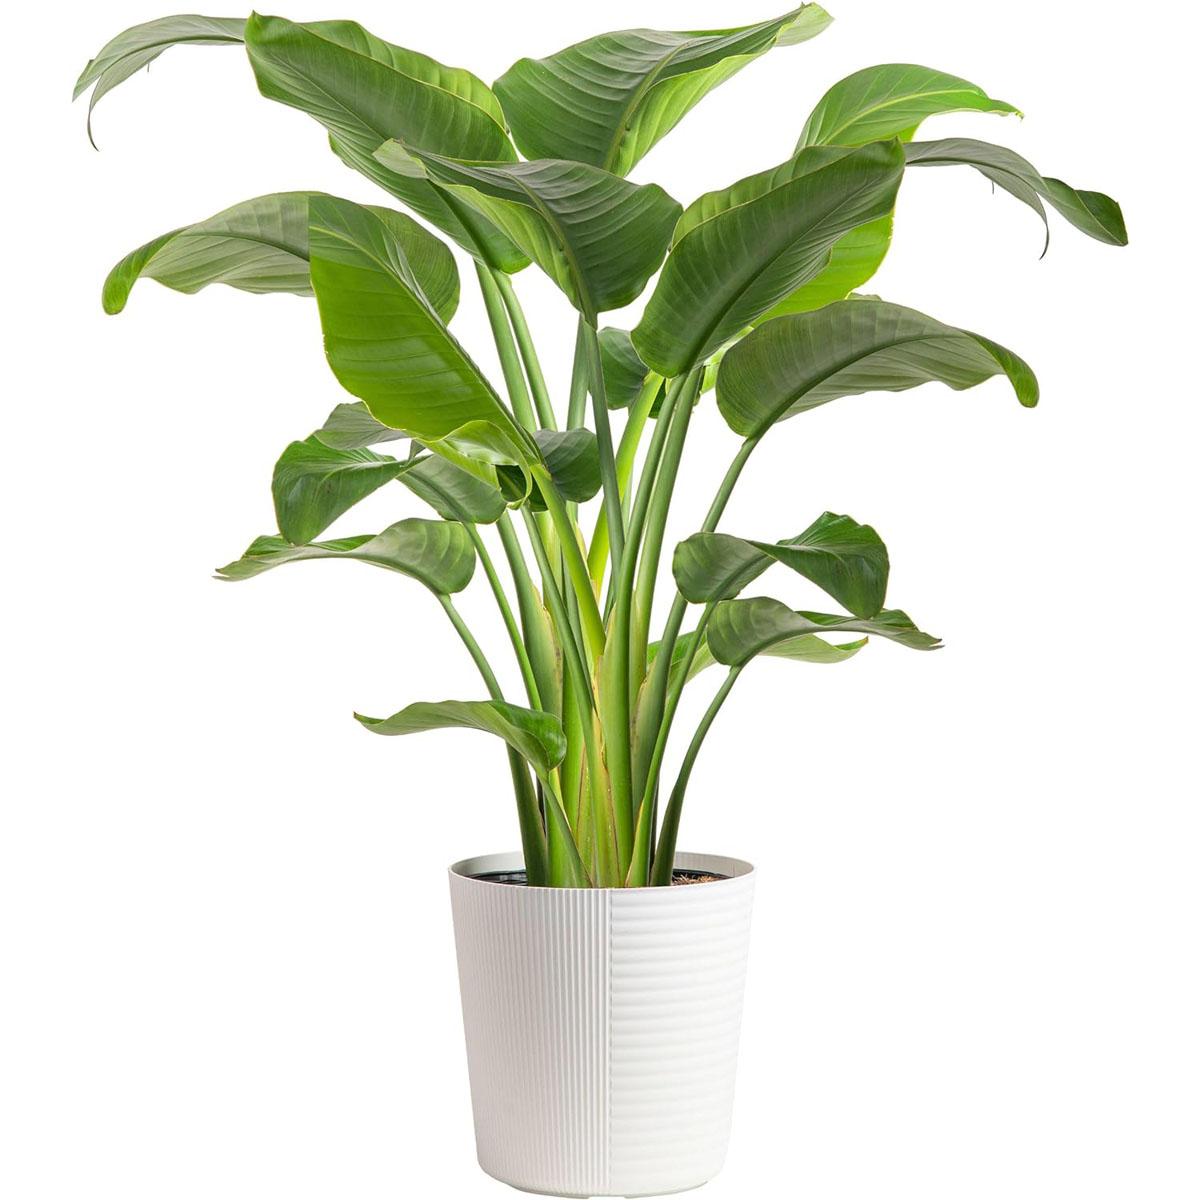 Costa Farms White Bird of Paradise Tropical Floor Plant for $28.79